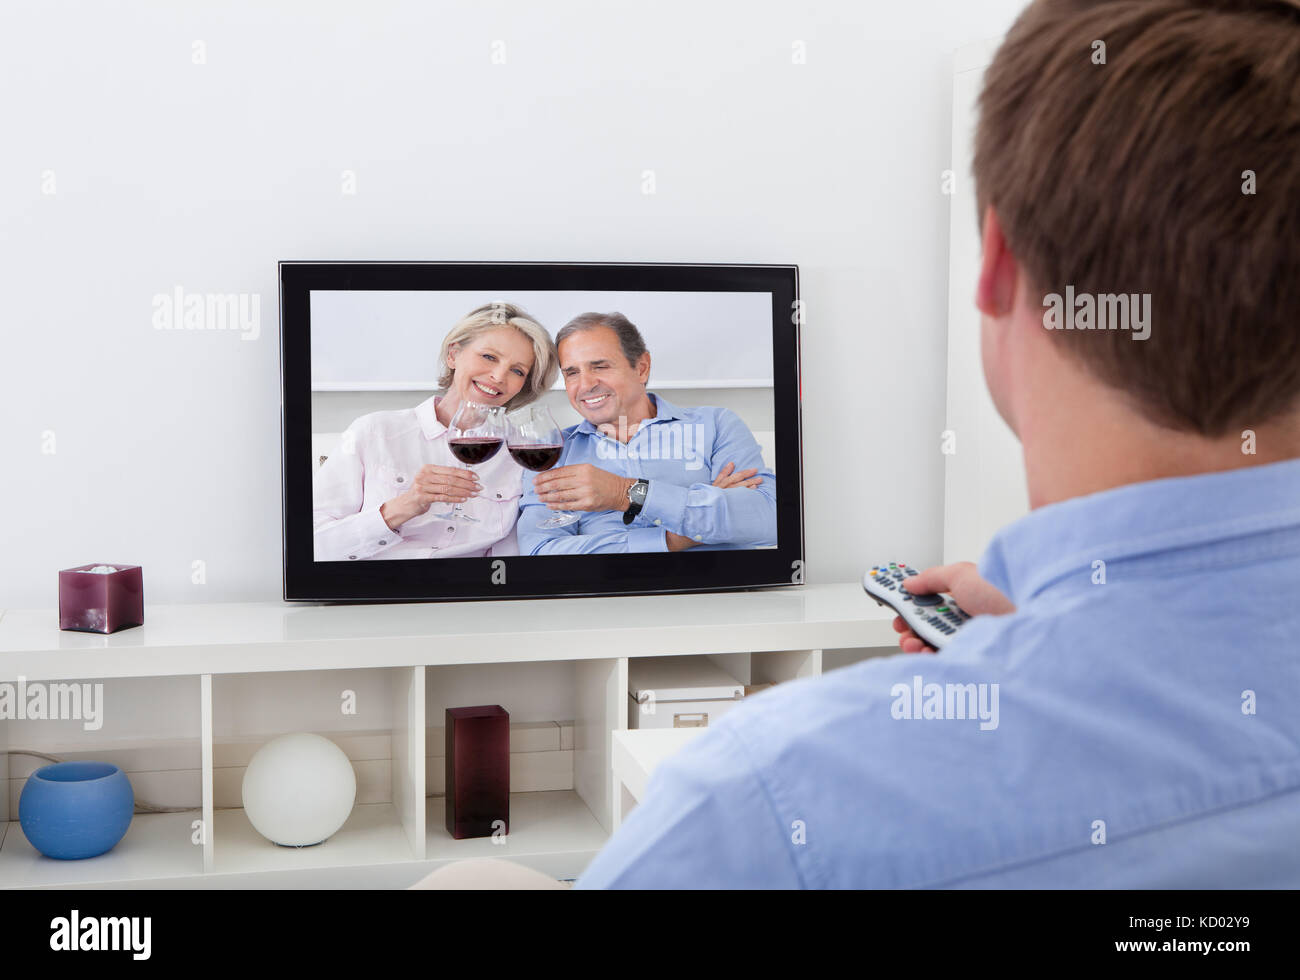 Rear View Of A Man Sitting On Couch Watching Television Stock Photo